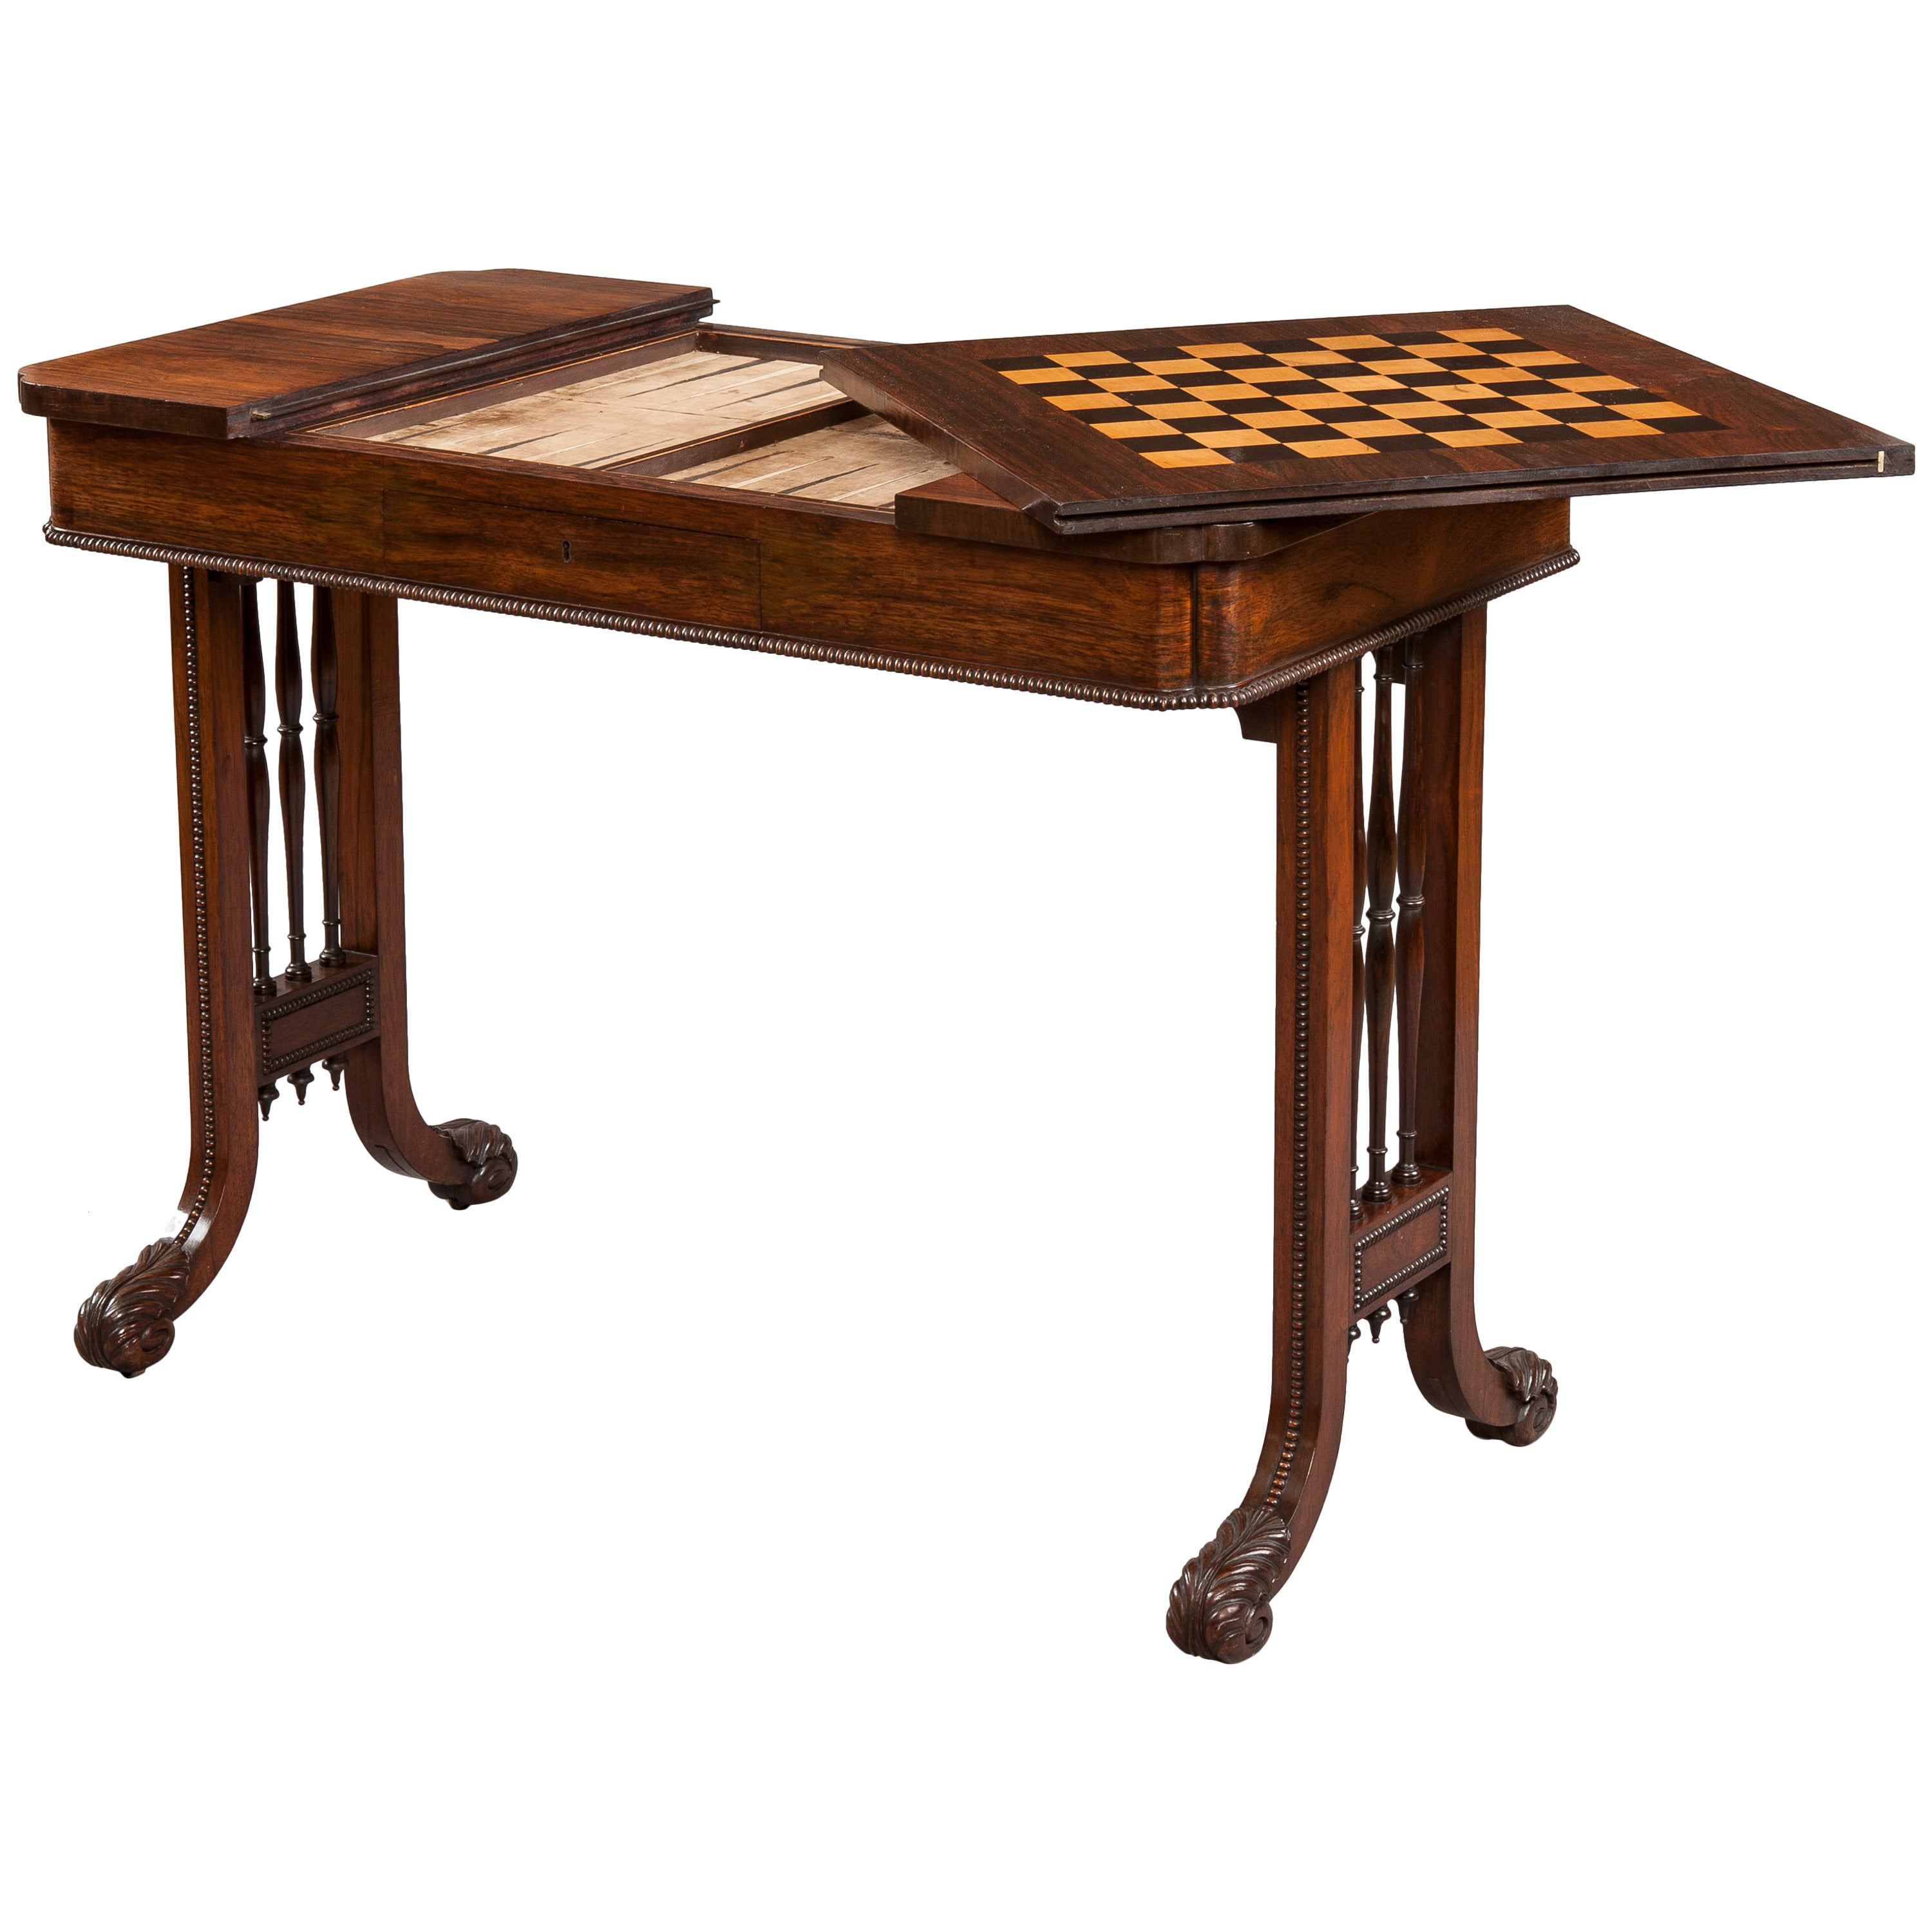 George IV Period Games Table Attributed to Gillows of Lancaster